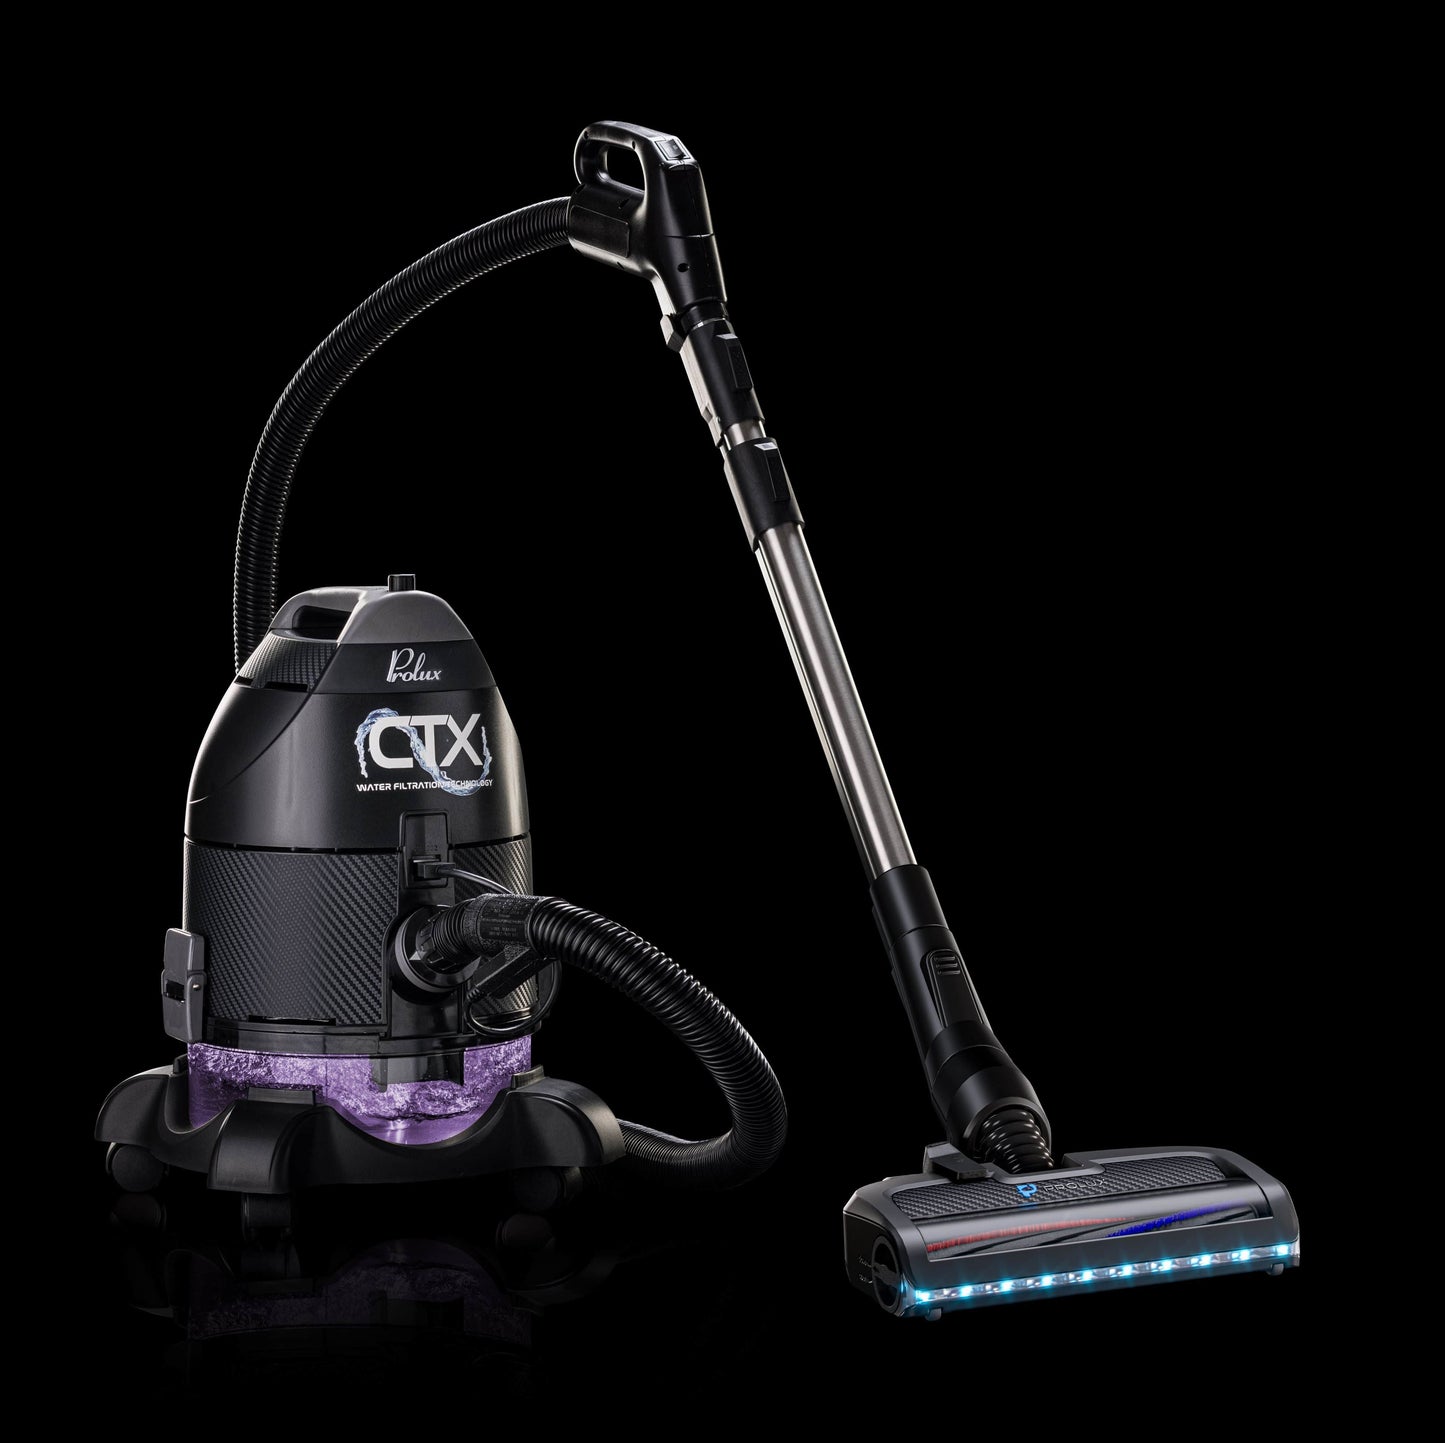 DEMO Prolux CTX PET Water Filtration Bagless Canister Vacuum Cleaner